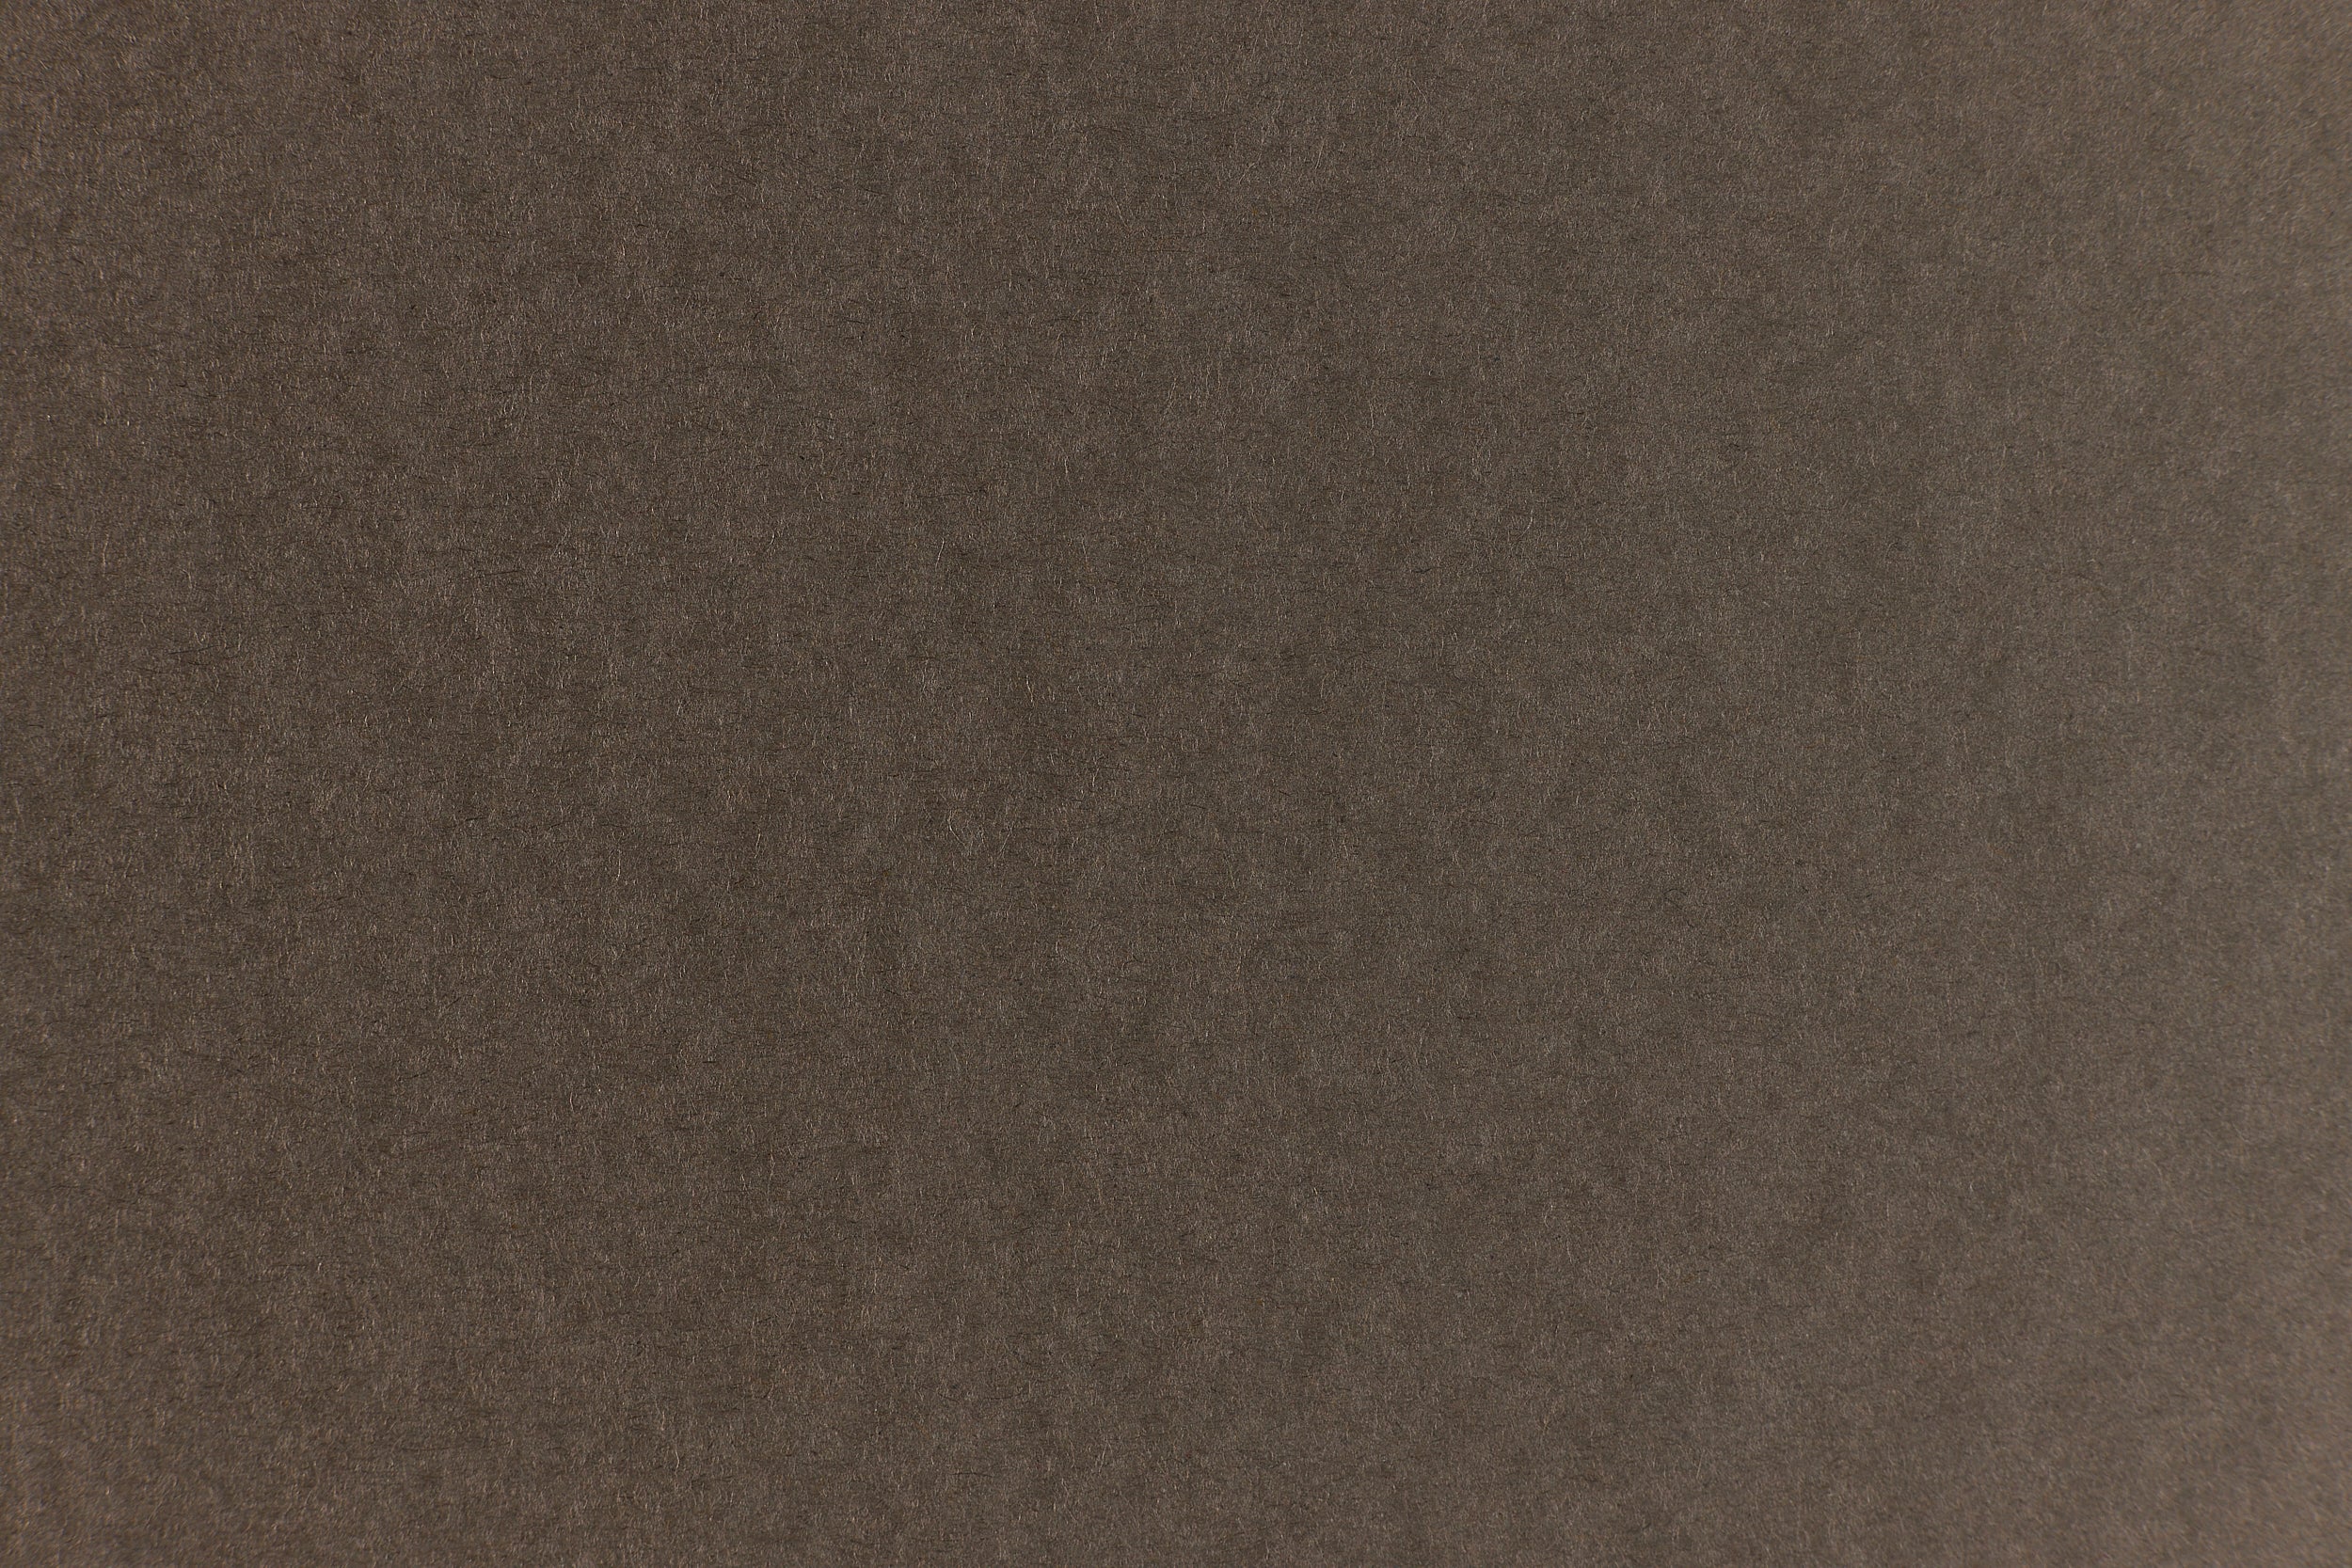 Brown Construction Paper